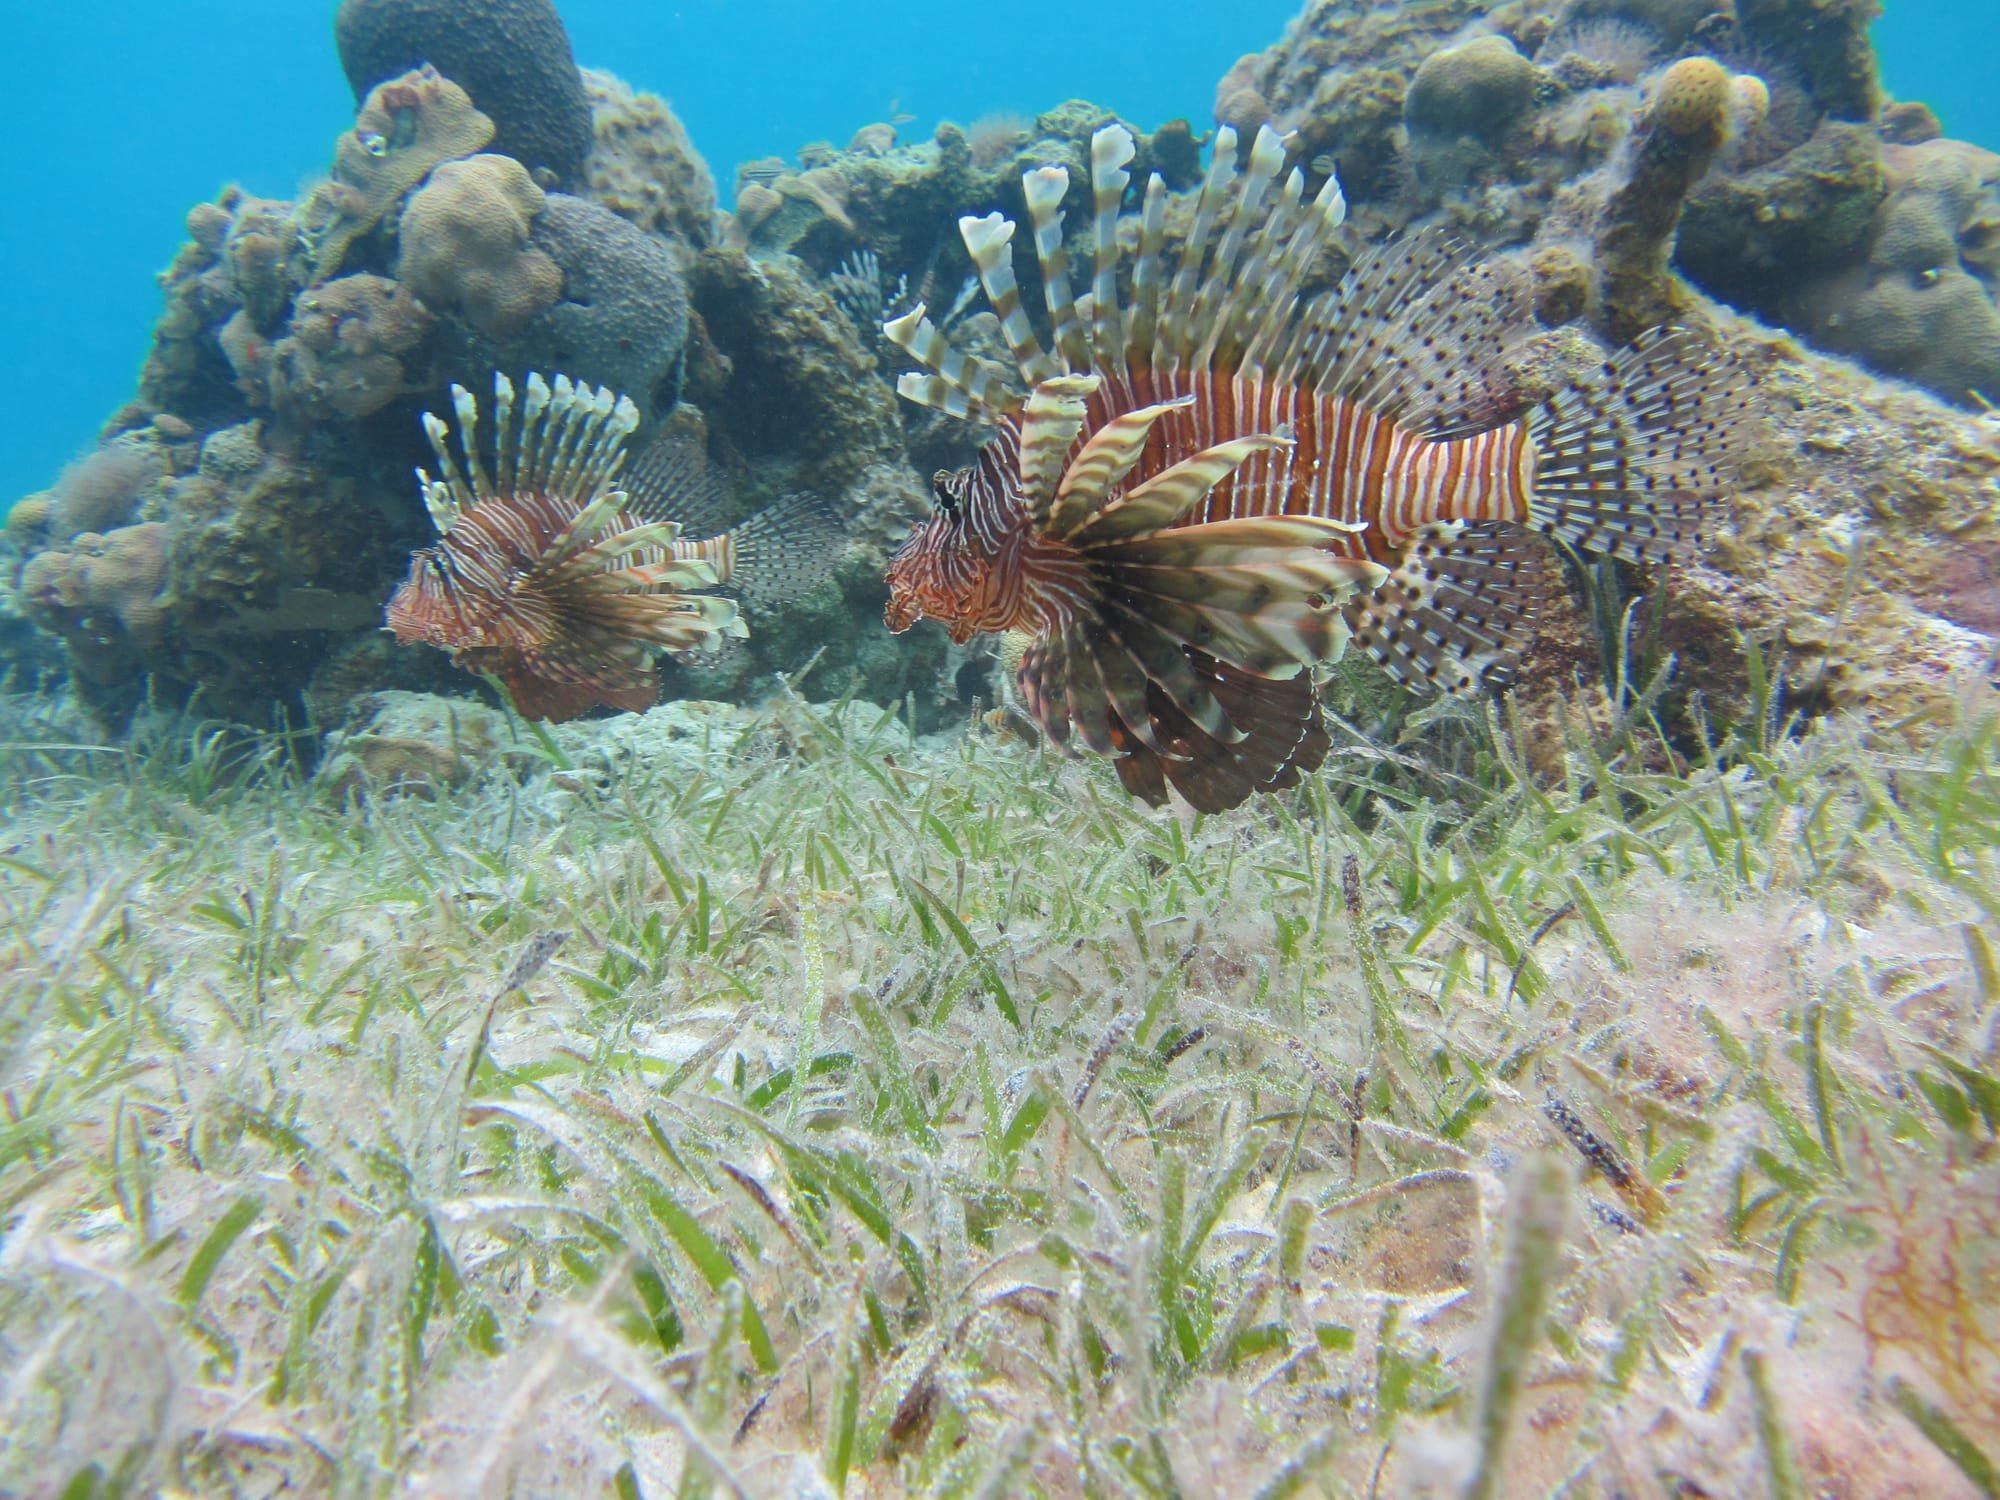 Should we eat lionfish to control their numbers?